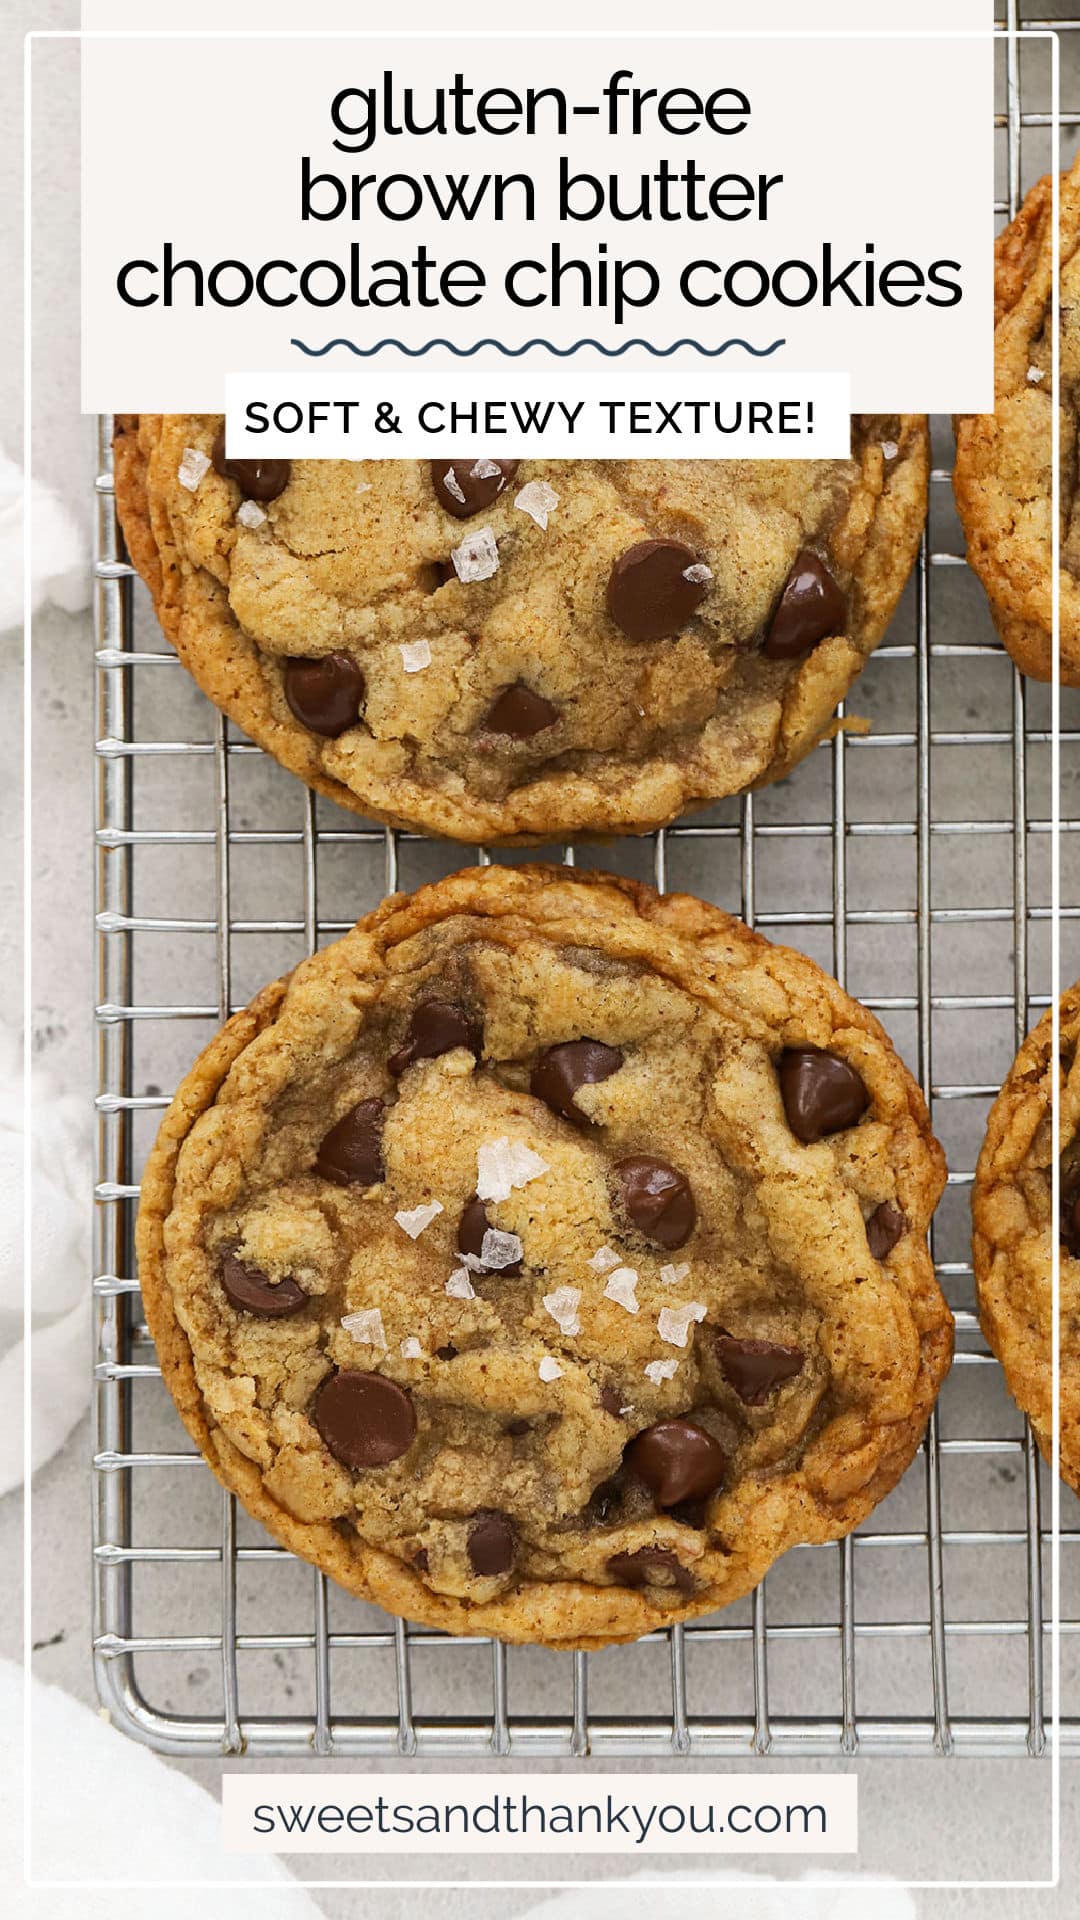 These gluten-free brown butter chocolate chip cookies are cookie PERFECTION. With their golden, crisp edges, chewy centers & TONS flavor in every bite, we think they're the best gluten-free chocolate chip cookies recipe around! They're made from simple ingredients with just a few tricks to give them amazing flavor and texture. (The perfect gluten-free cookie recipe for beginners!)